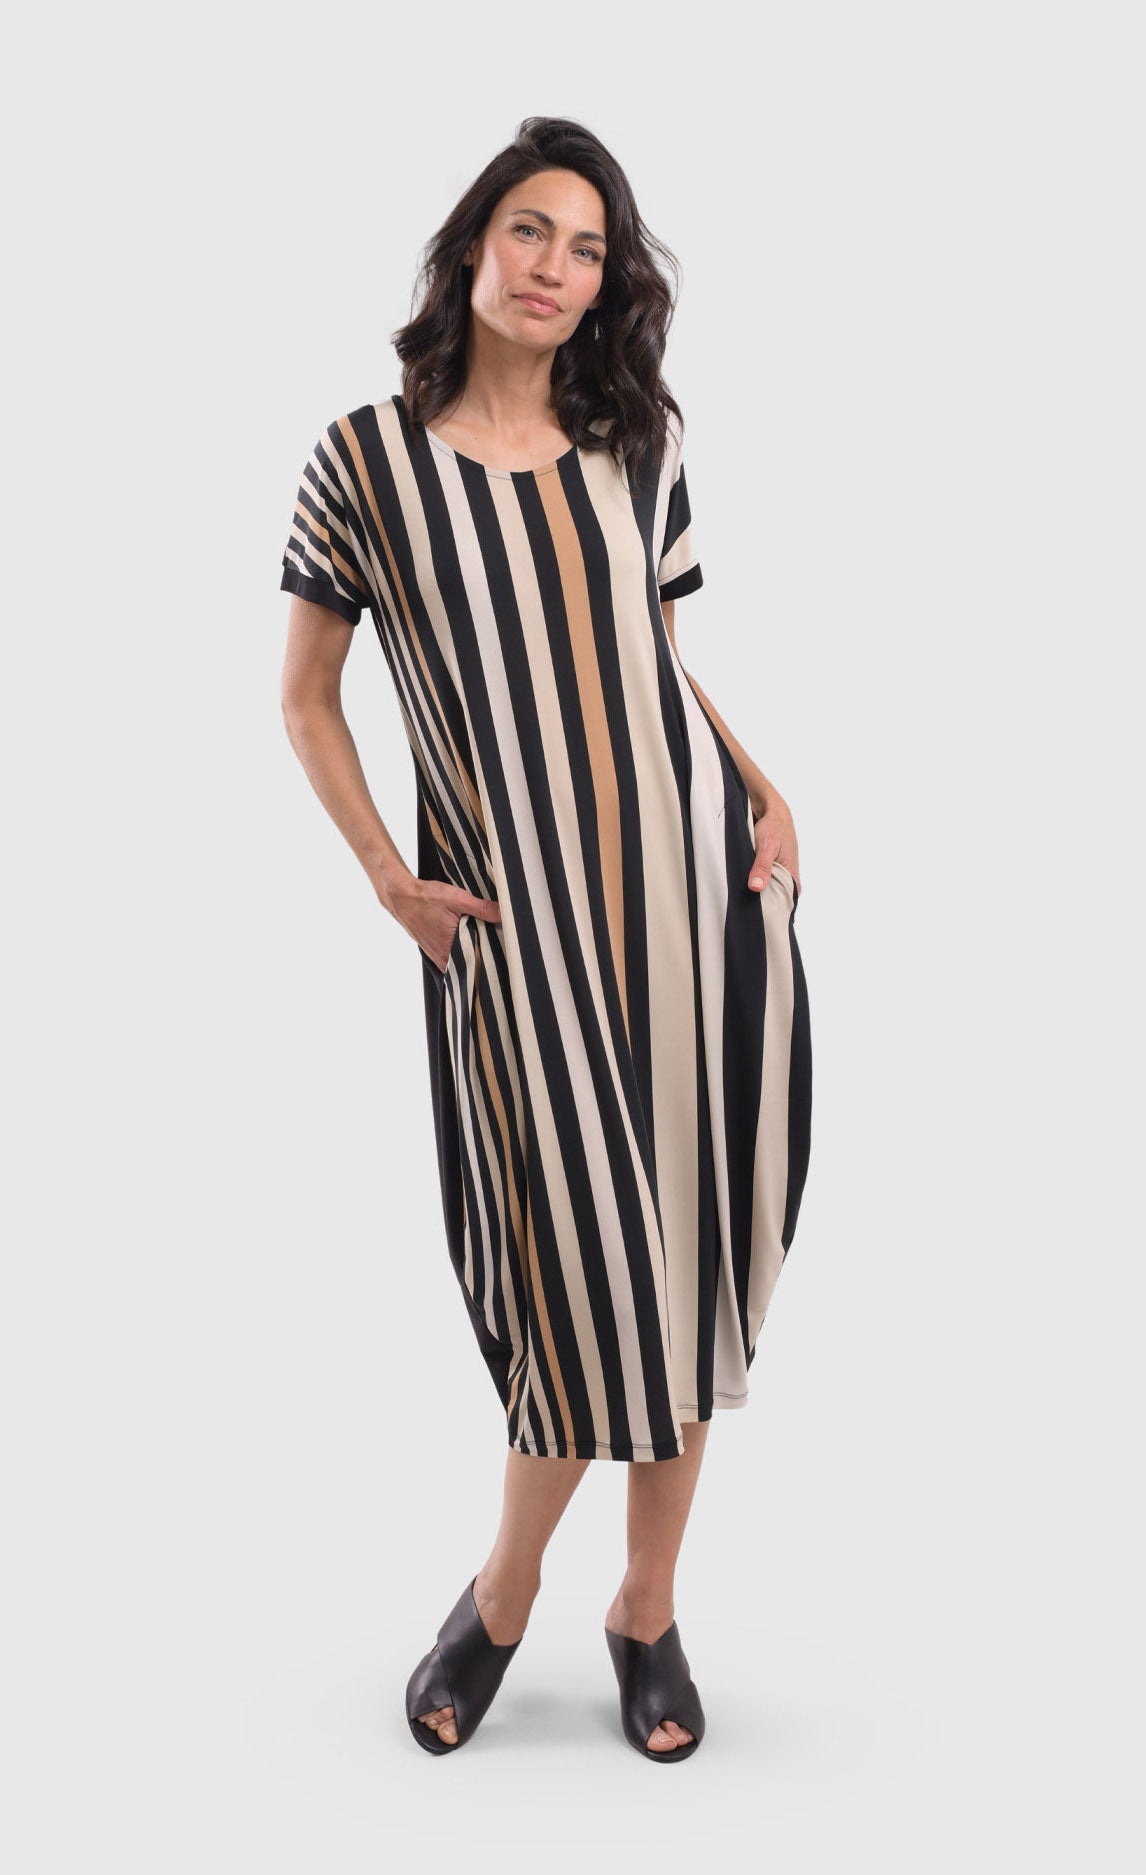 Front full body view of a woman wearing the alembika sunrise stripe dress.  This dress has black and white vertical stripes with a couple of tan stripes in between. The dress has short sleeves, a relaxed silhouette with a poof skirt, and two side pockets. This dress sits mid calf level.